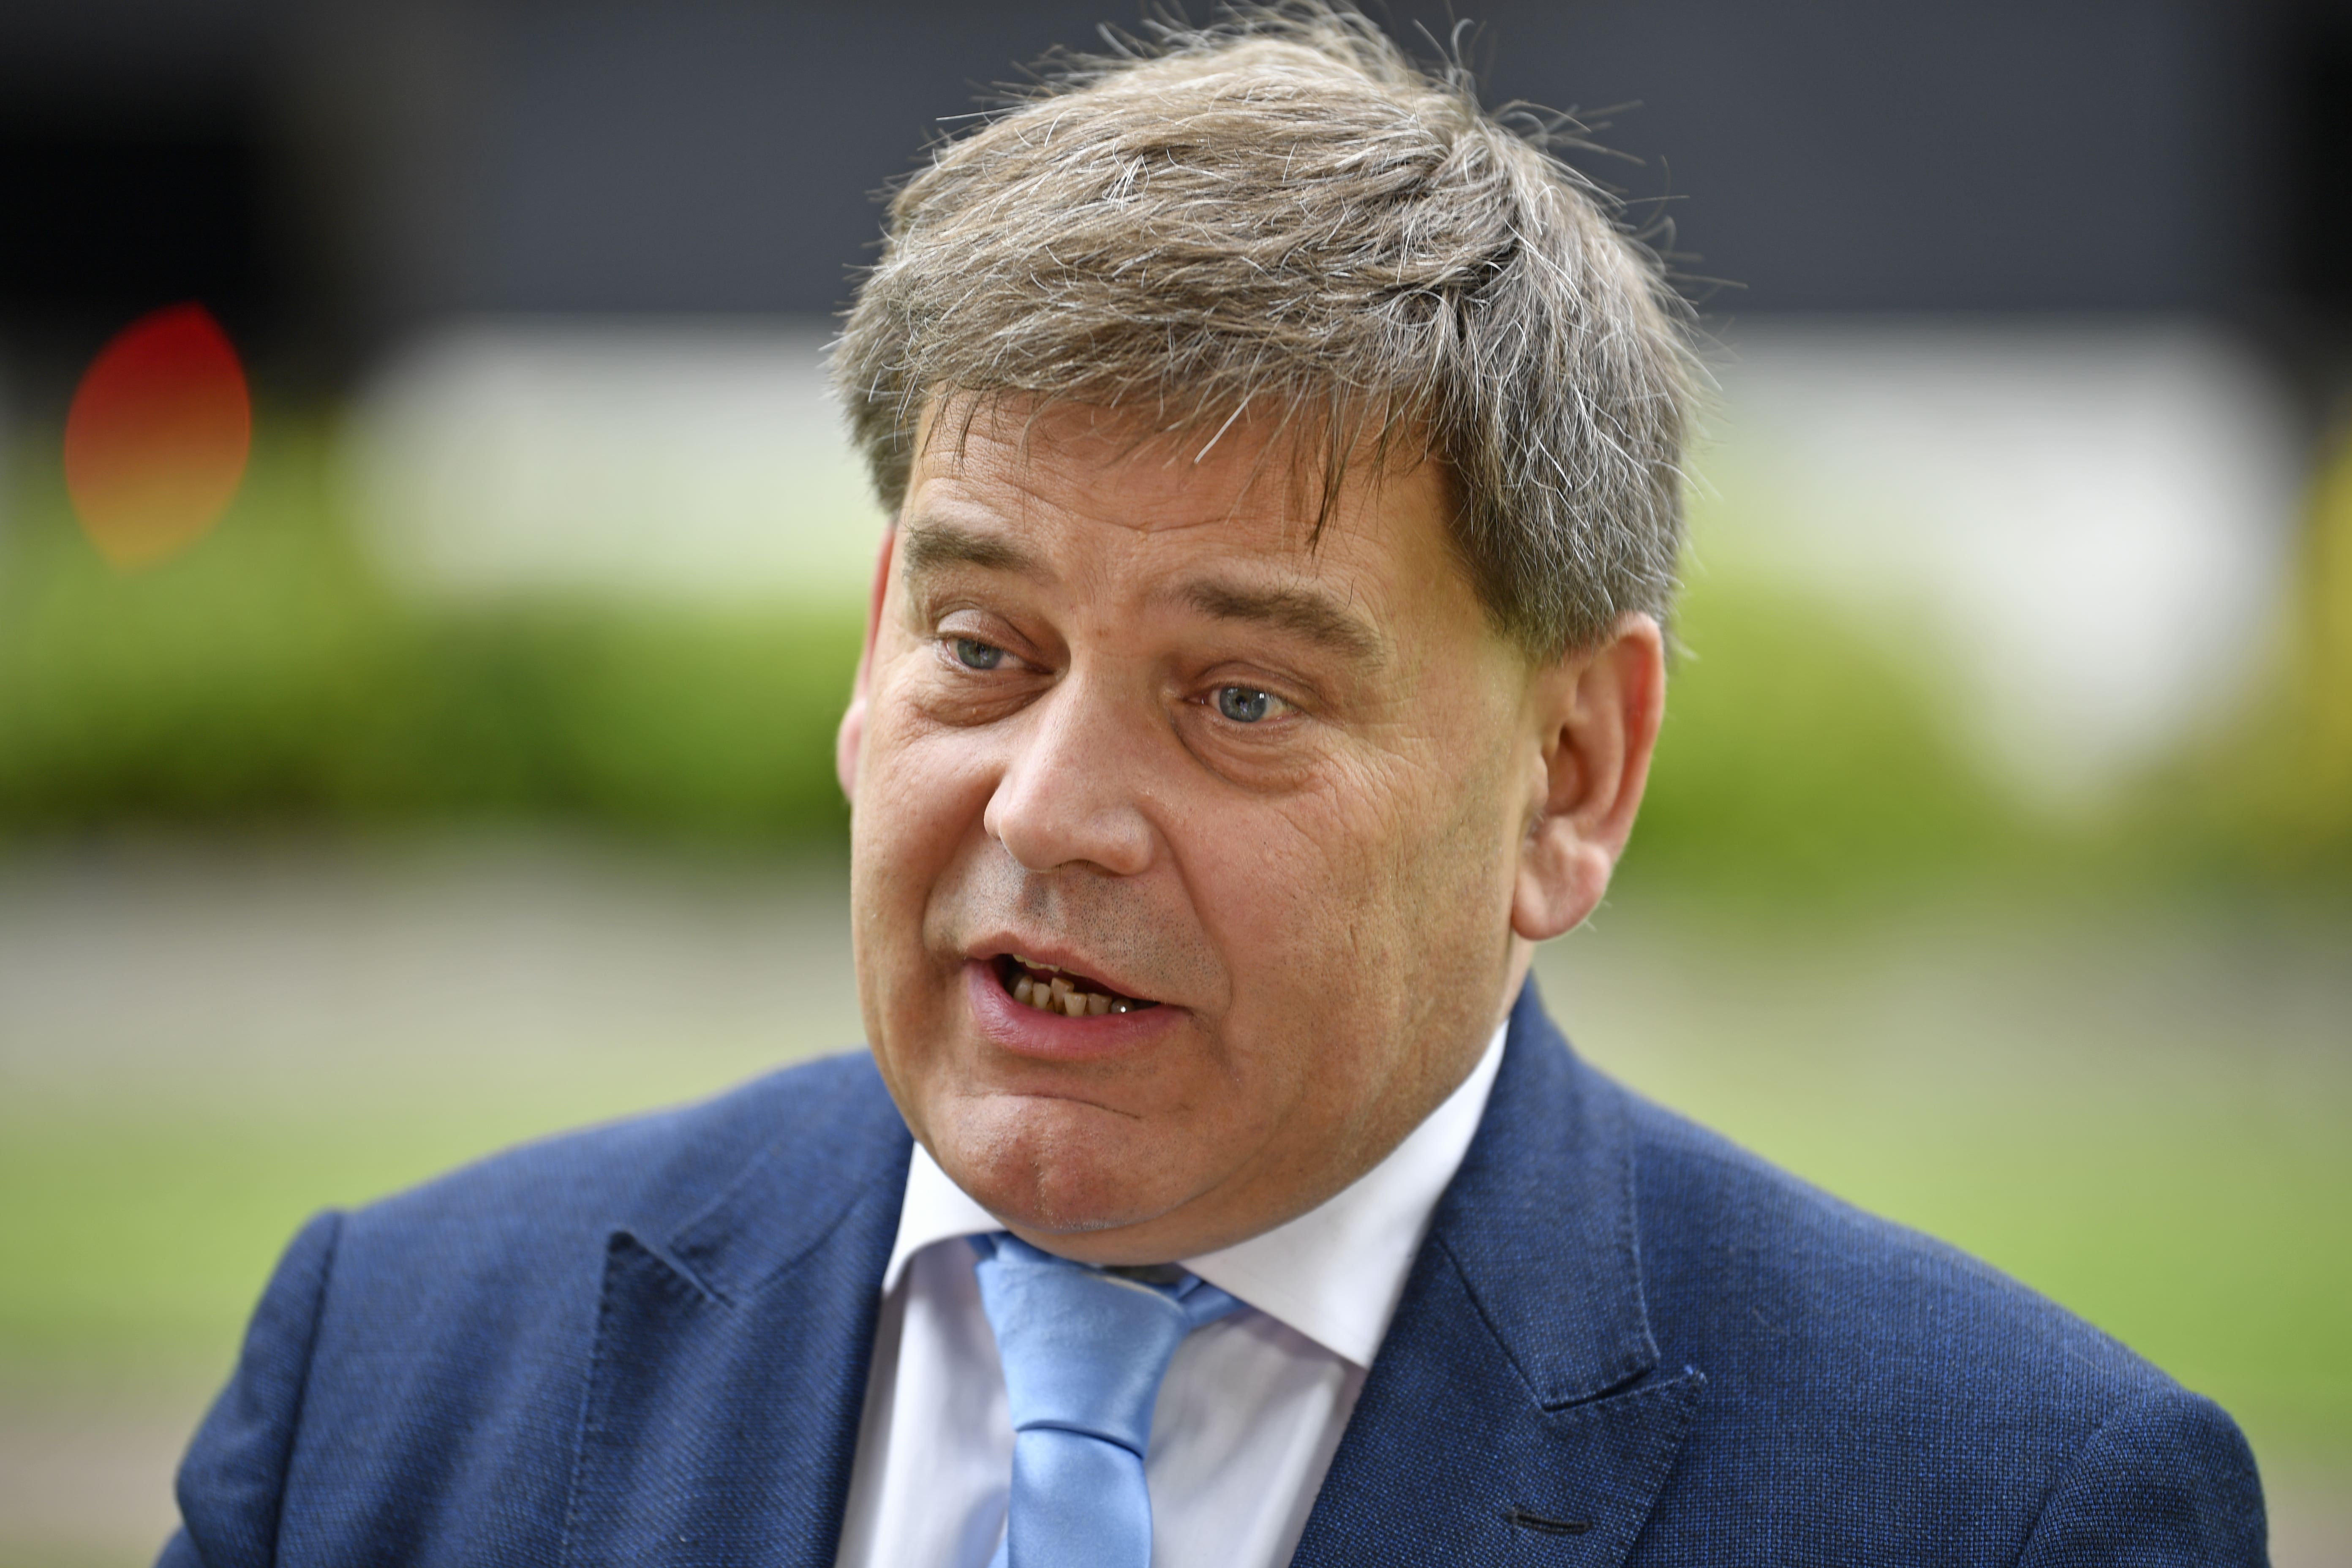 Andrew Bridgen has had the Conservative whip removed (Beresford Hodge/PA)